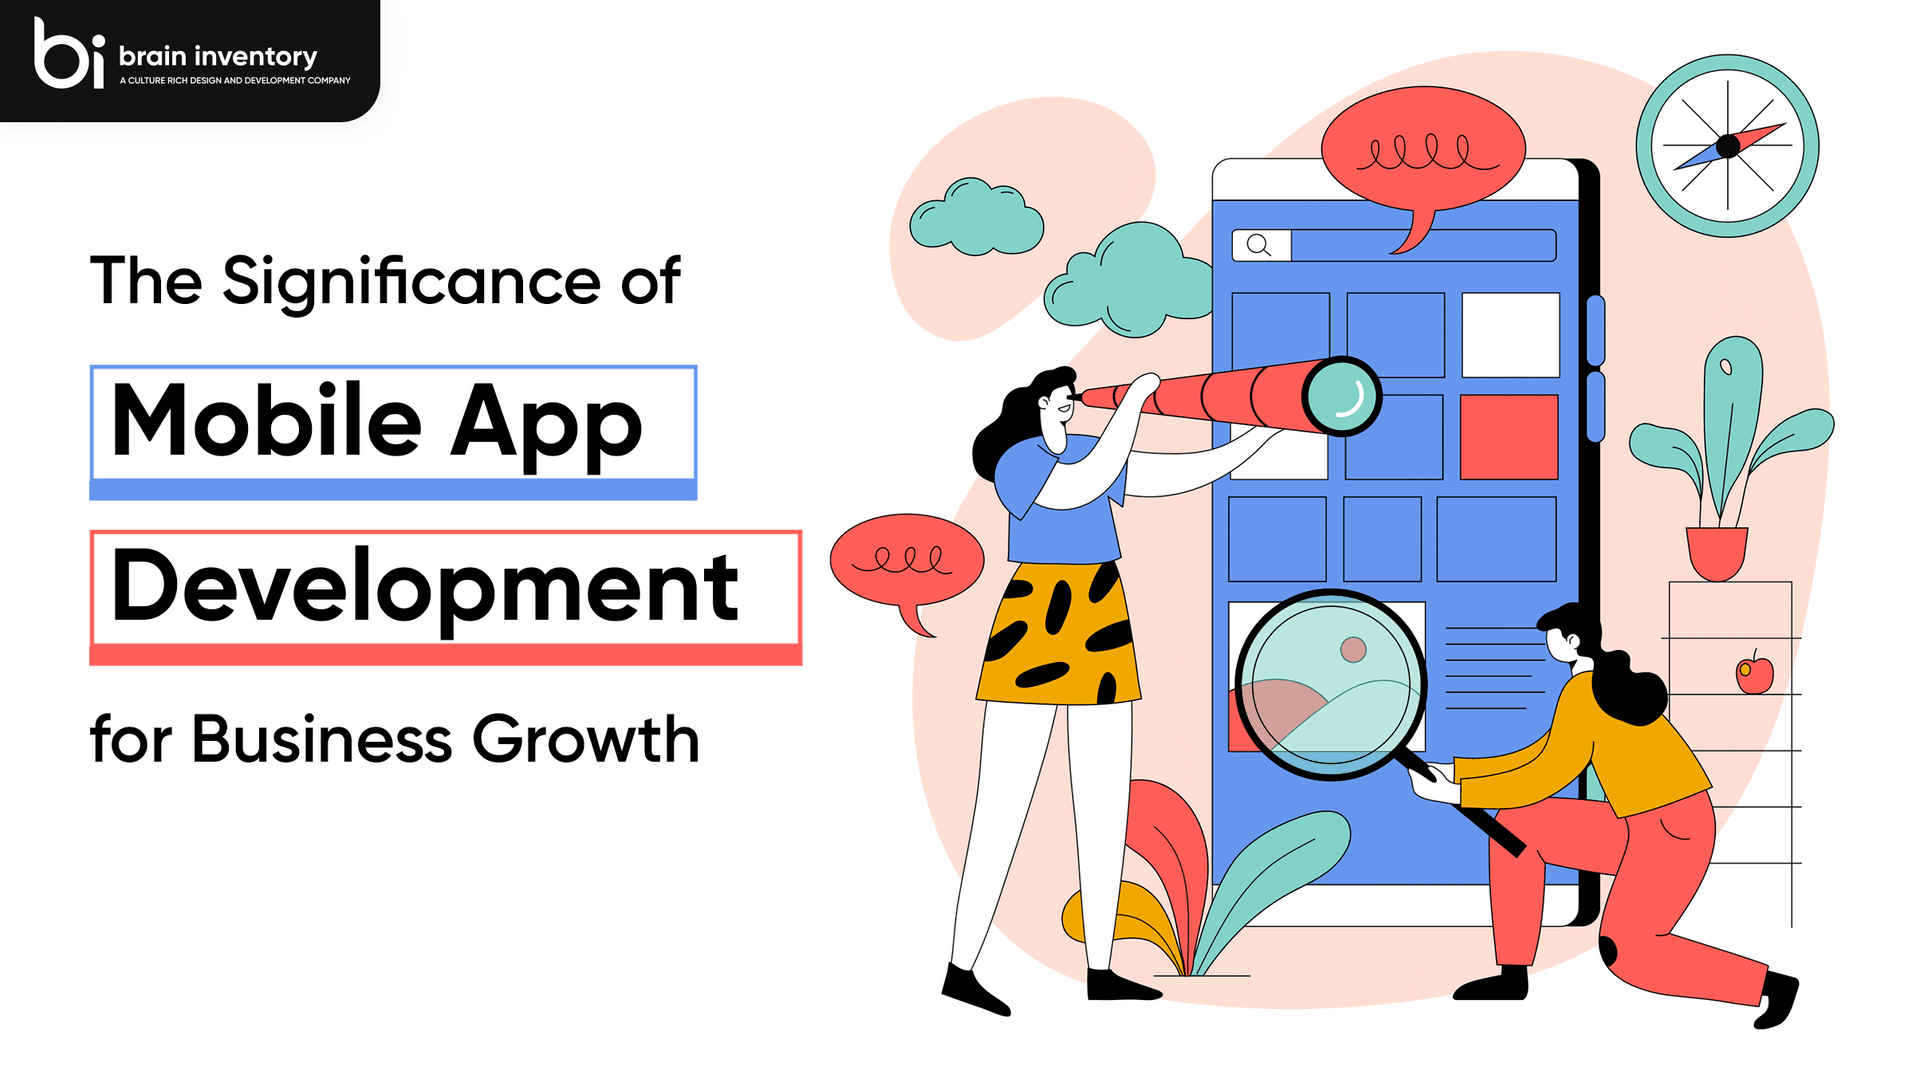 The Significance of Mobile App Development for Business Growth